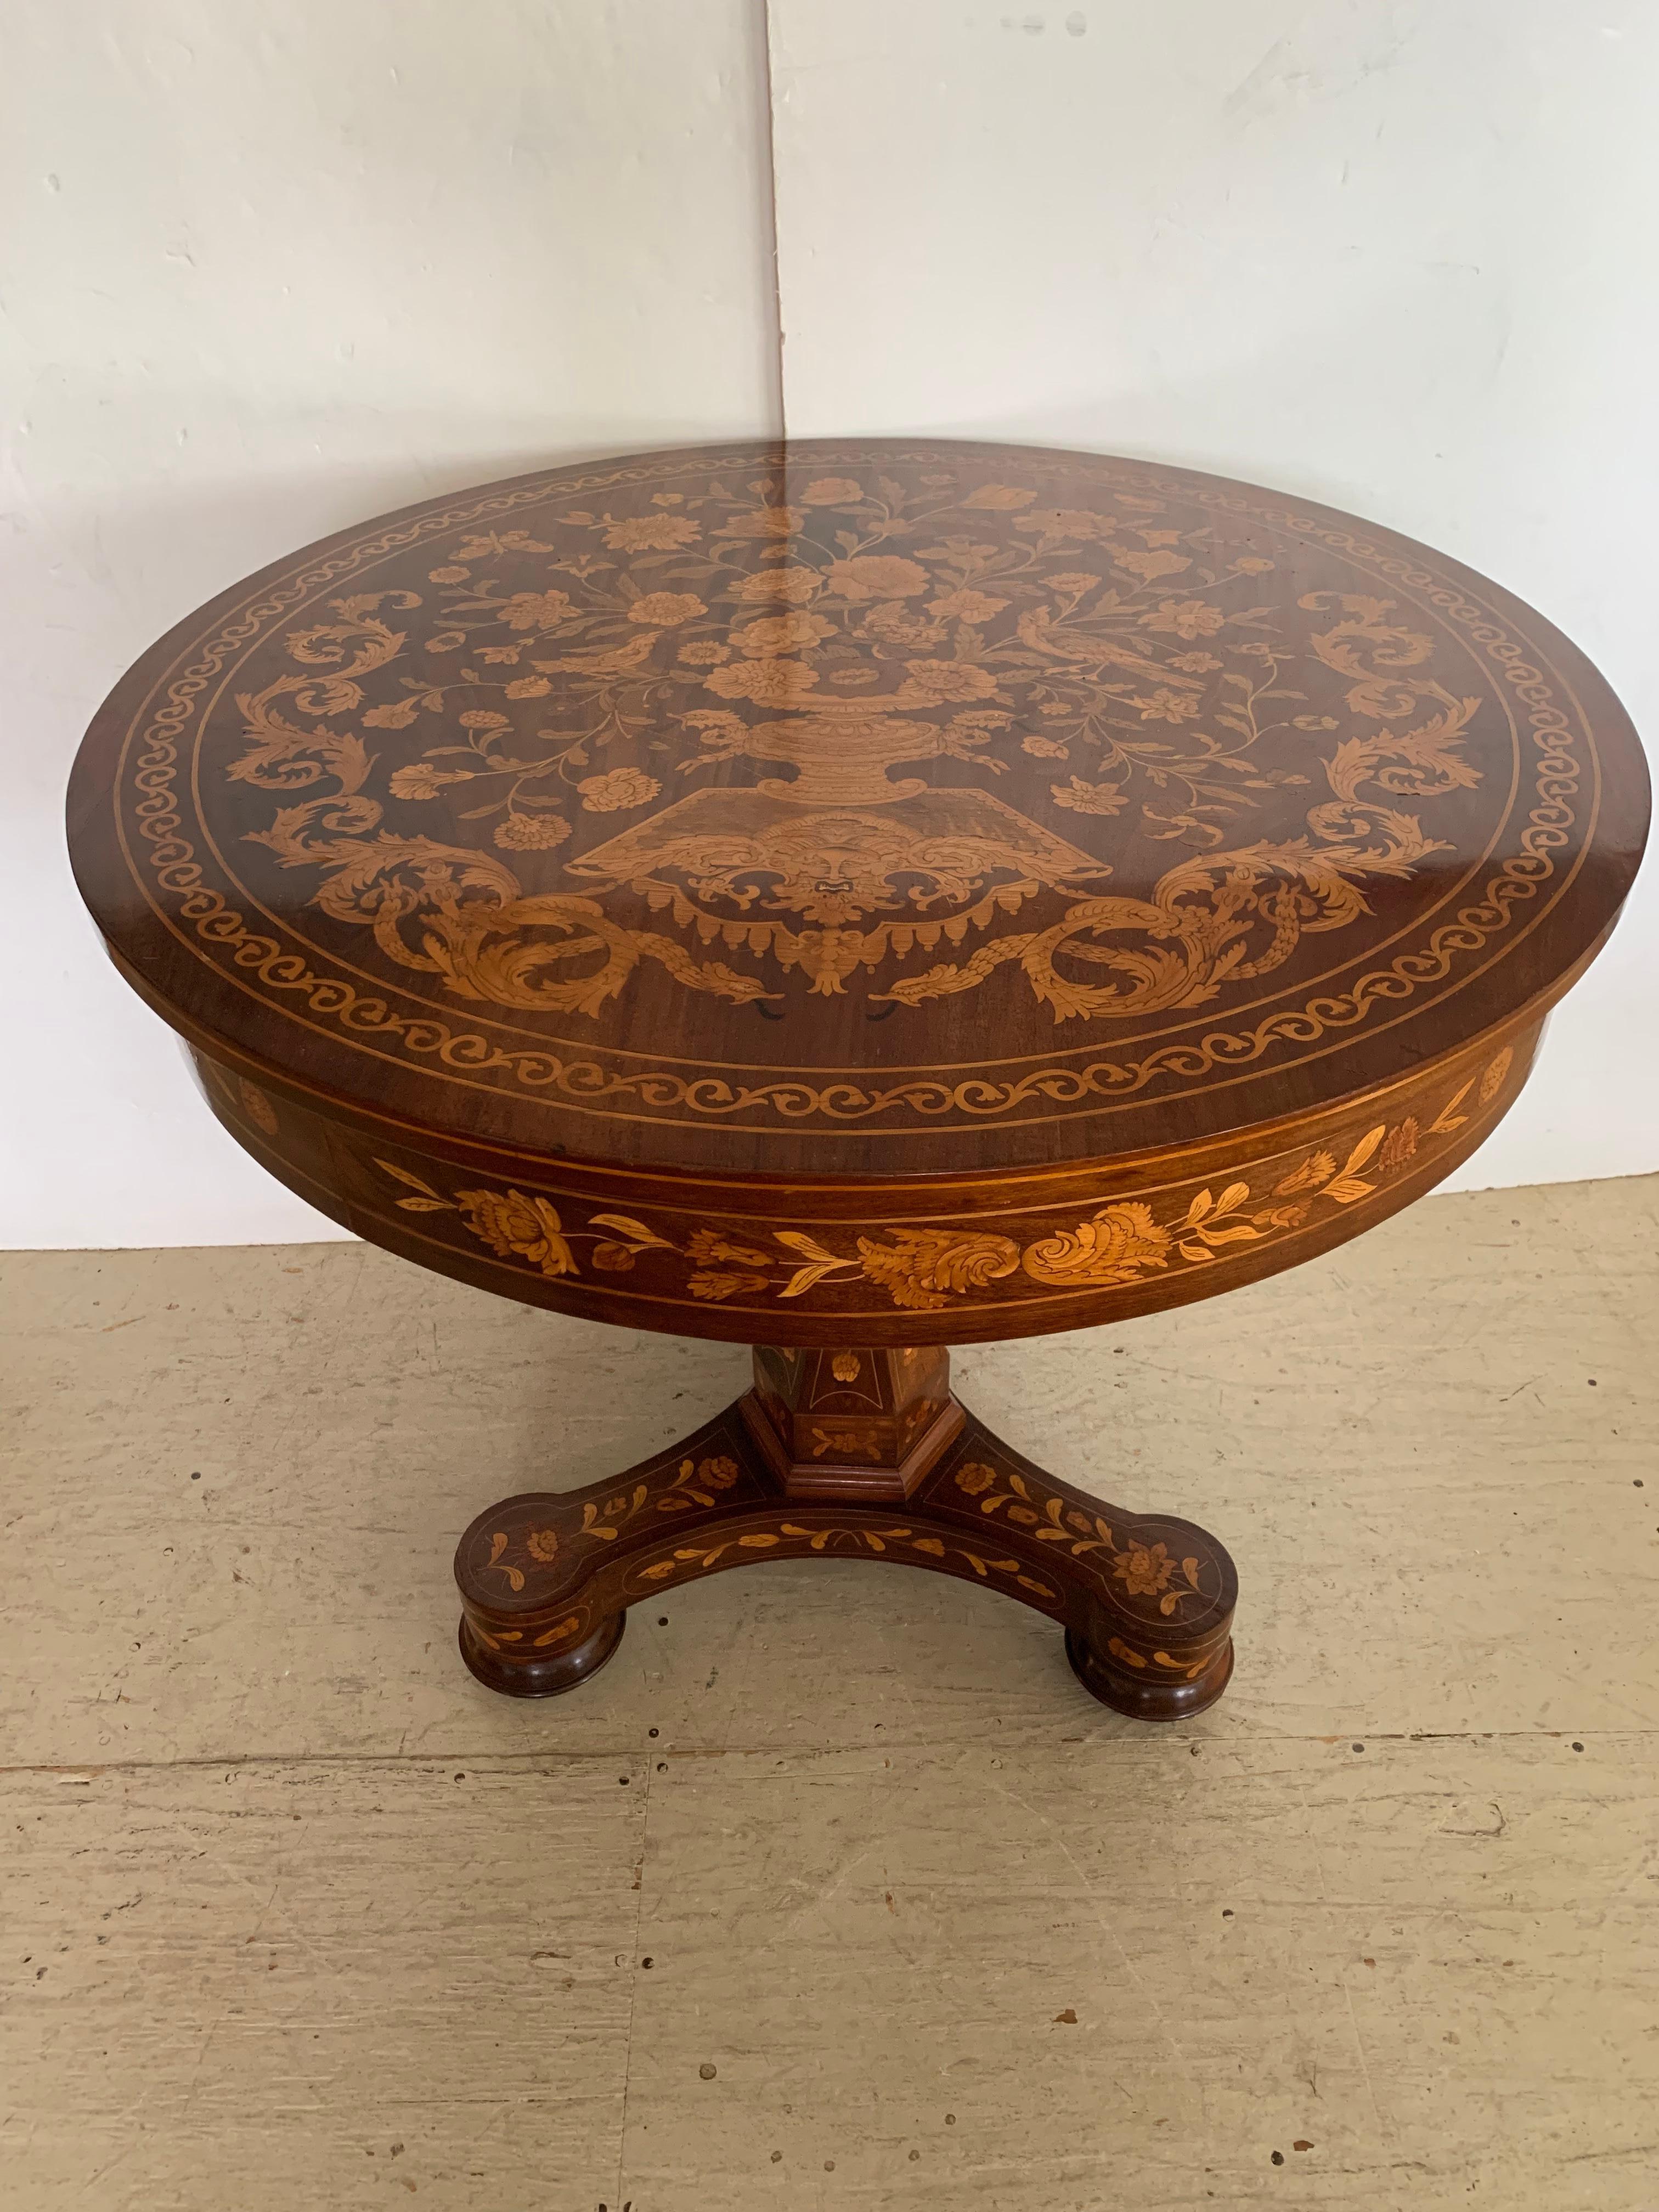 A marvelously decorative round foyer table or side table with elaborate inlaid marquetry on top, apron and base having floral and fauna and a central classical urn with overflowing bouquet. The faceted pedestal sits on a tripod base resting on bun